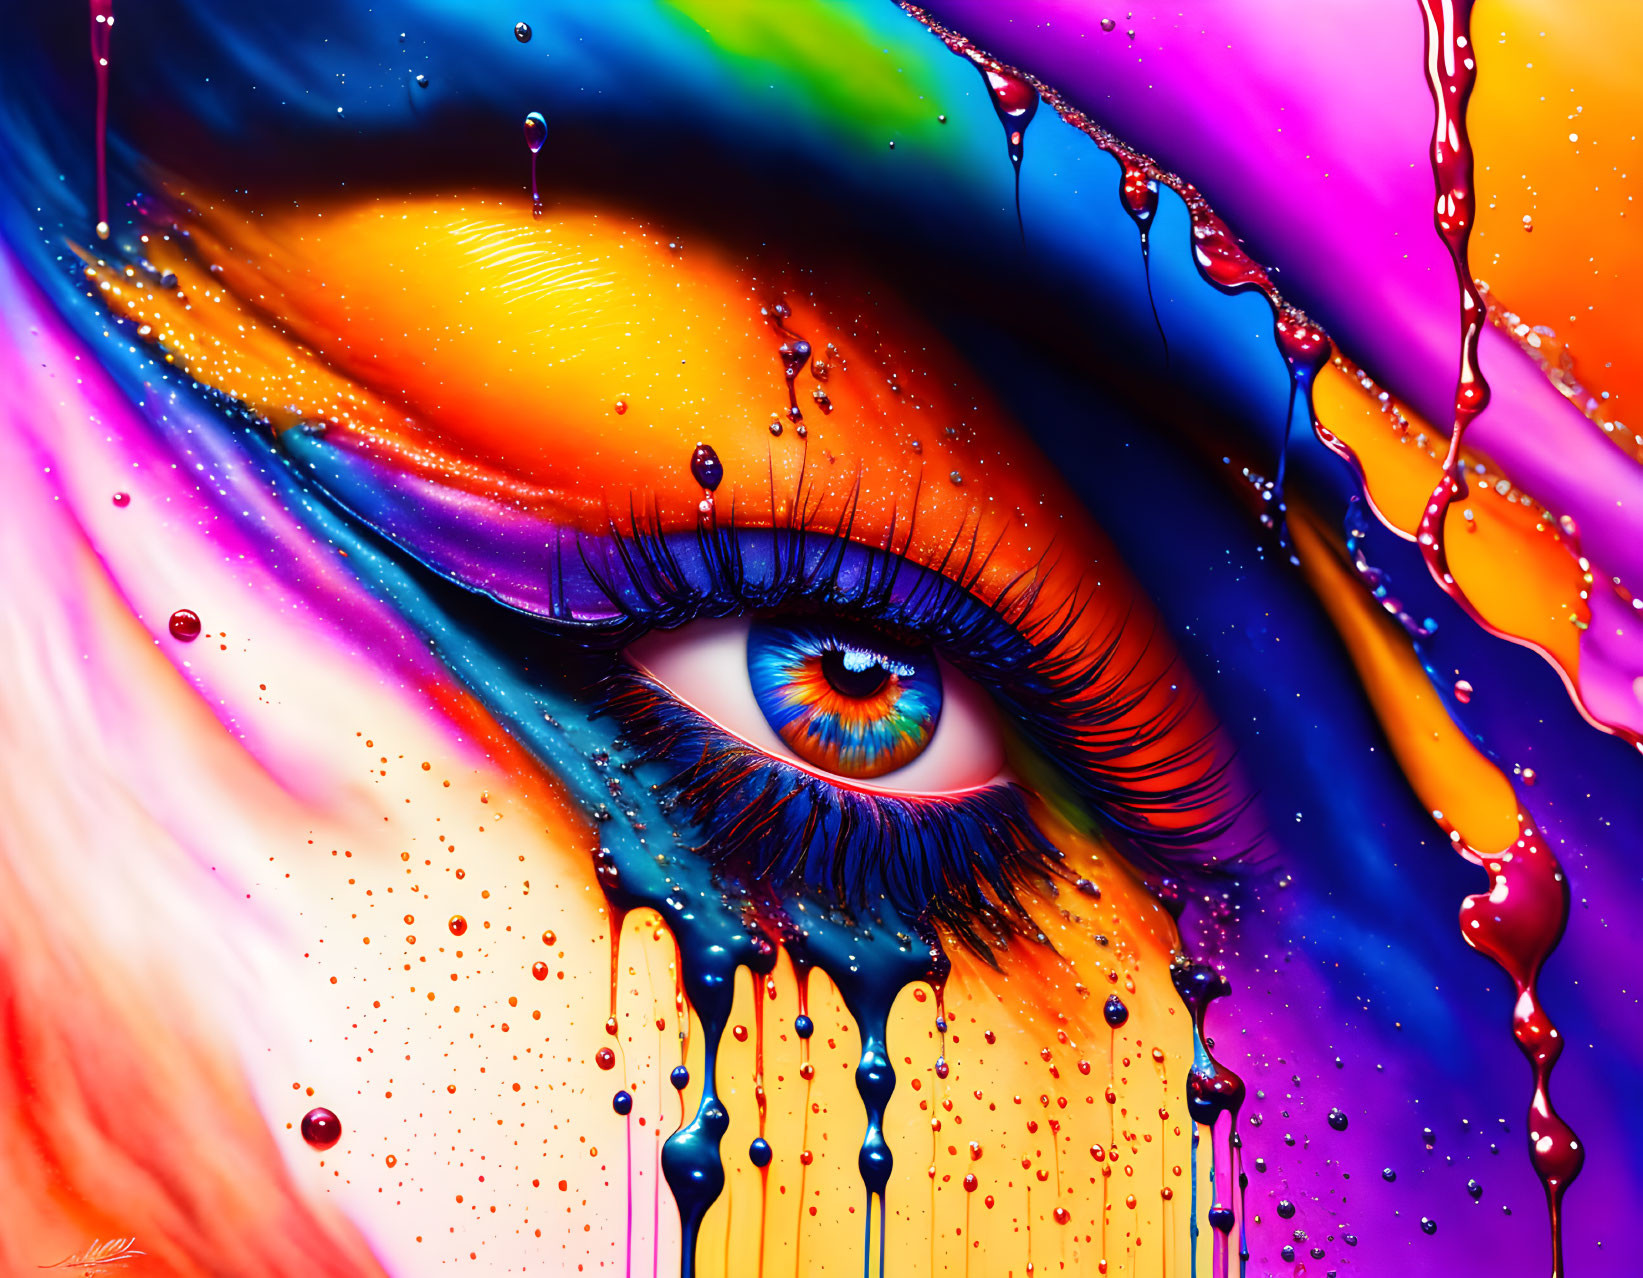 Close-up Eye with Multicolored Liquid Art: Abstract Psychedelic Image